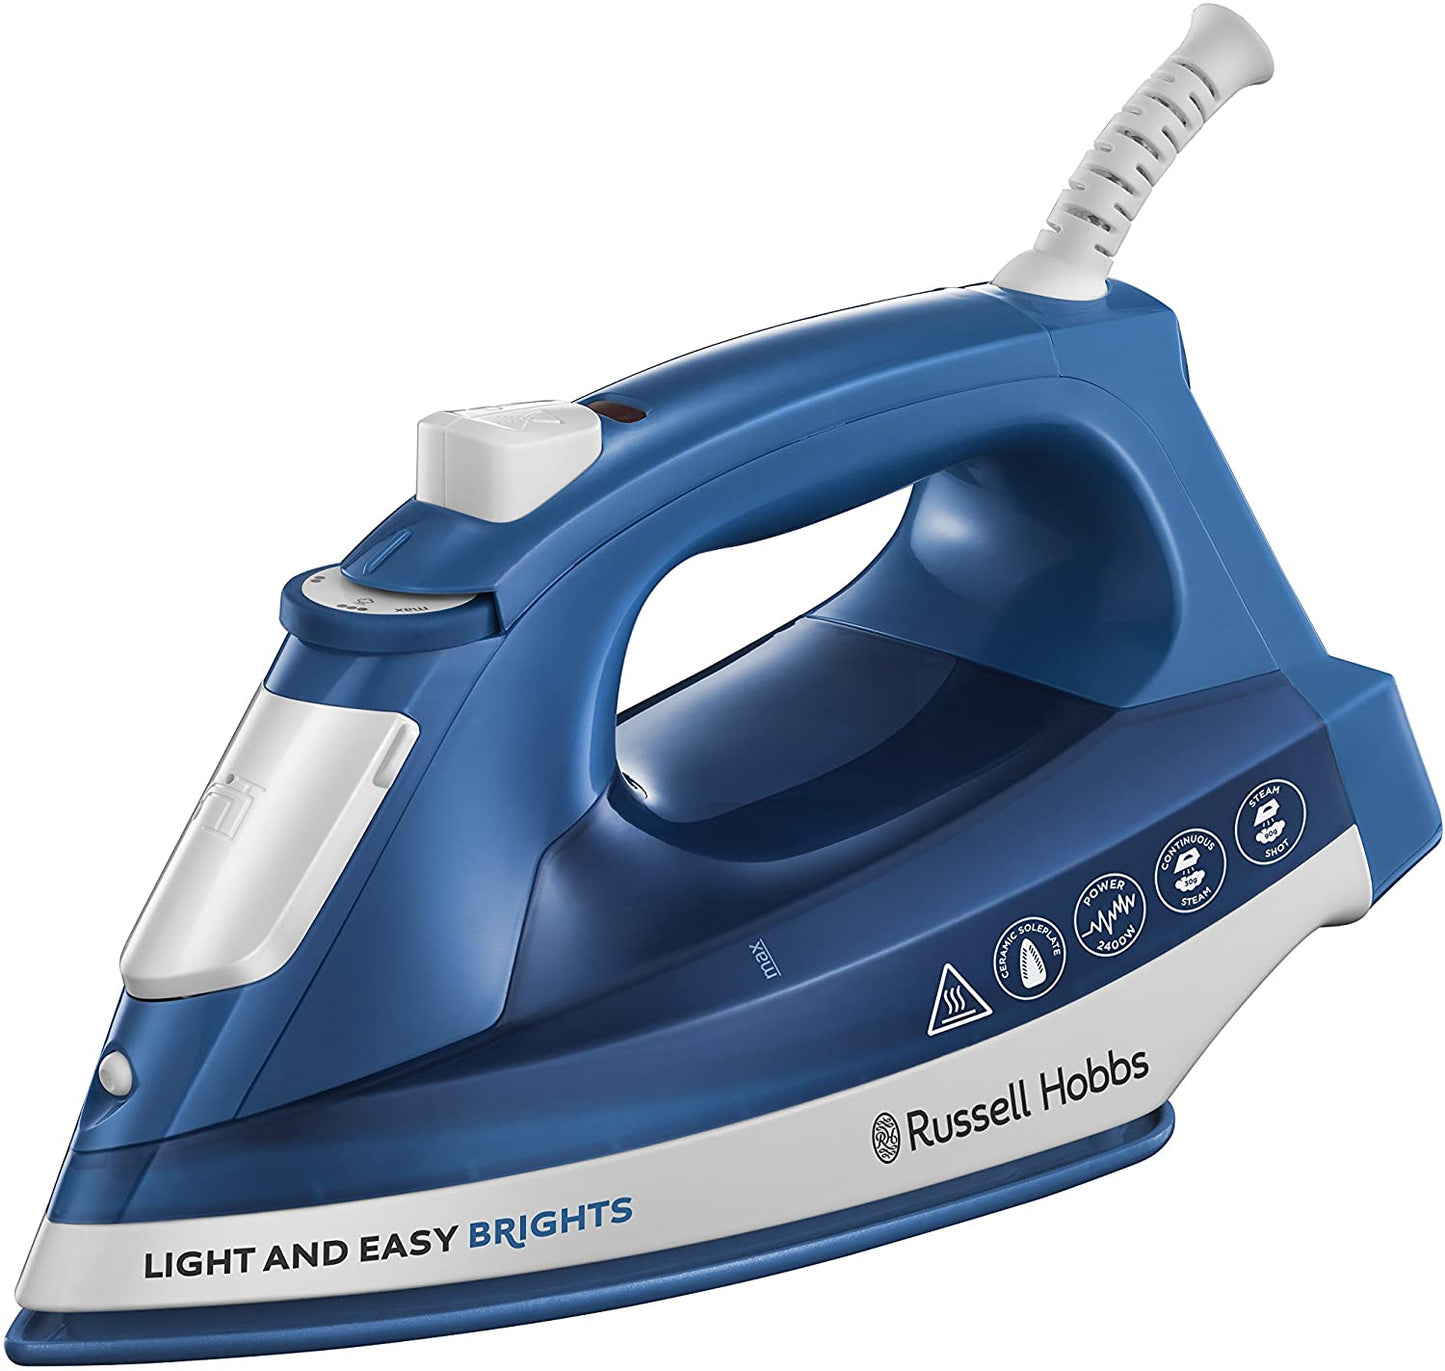 Russell Hobbs 24830 Light and Easy Brights Iron Saphire 2400W Blue